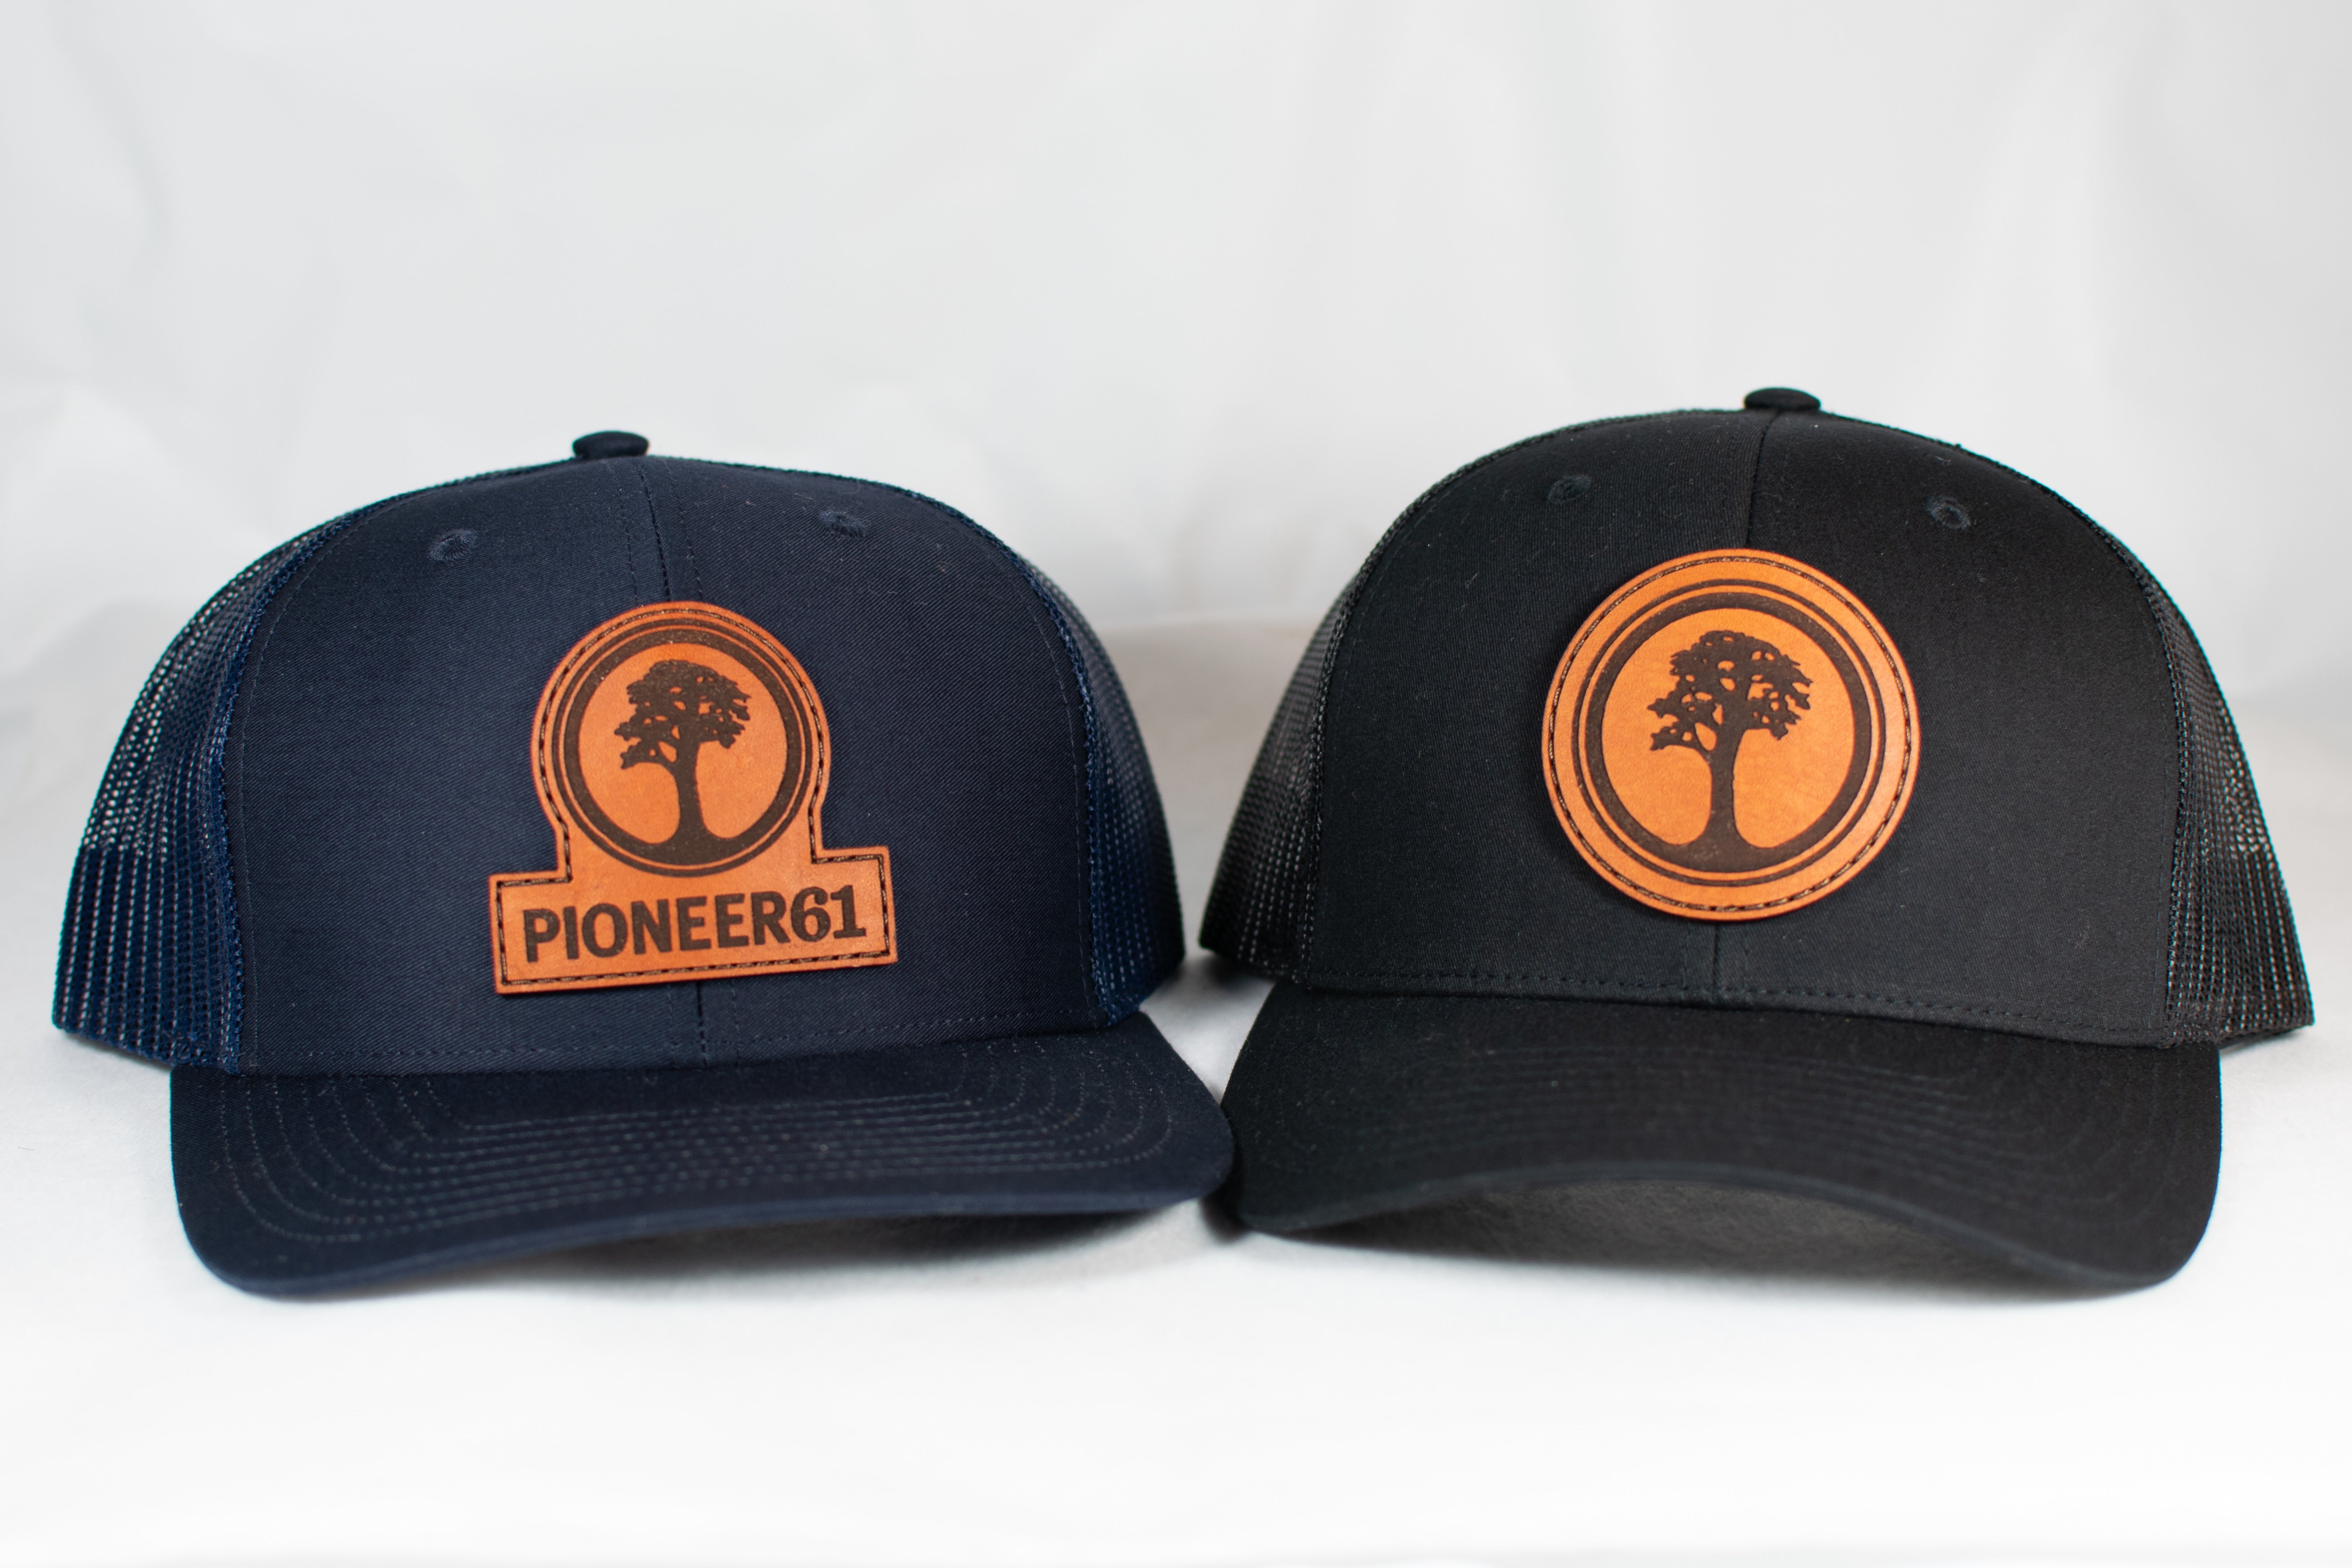 Pioneer61 Hat - Leather Patch